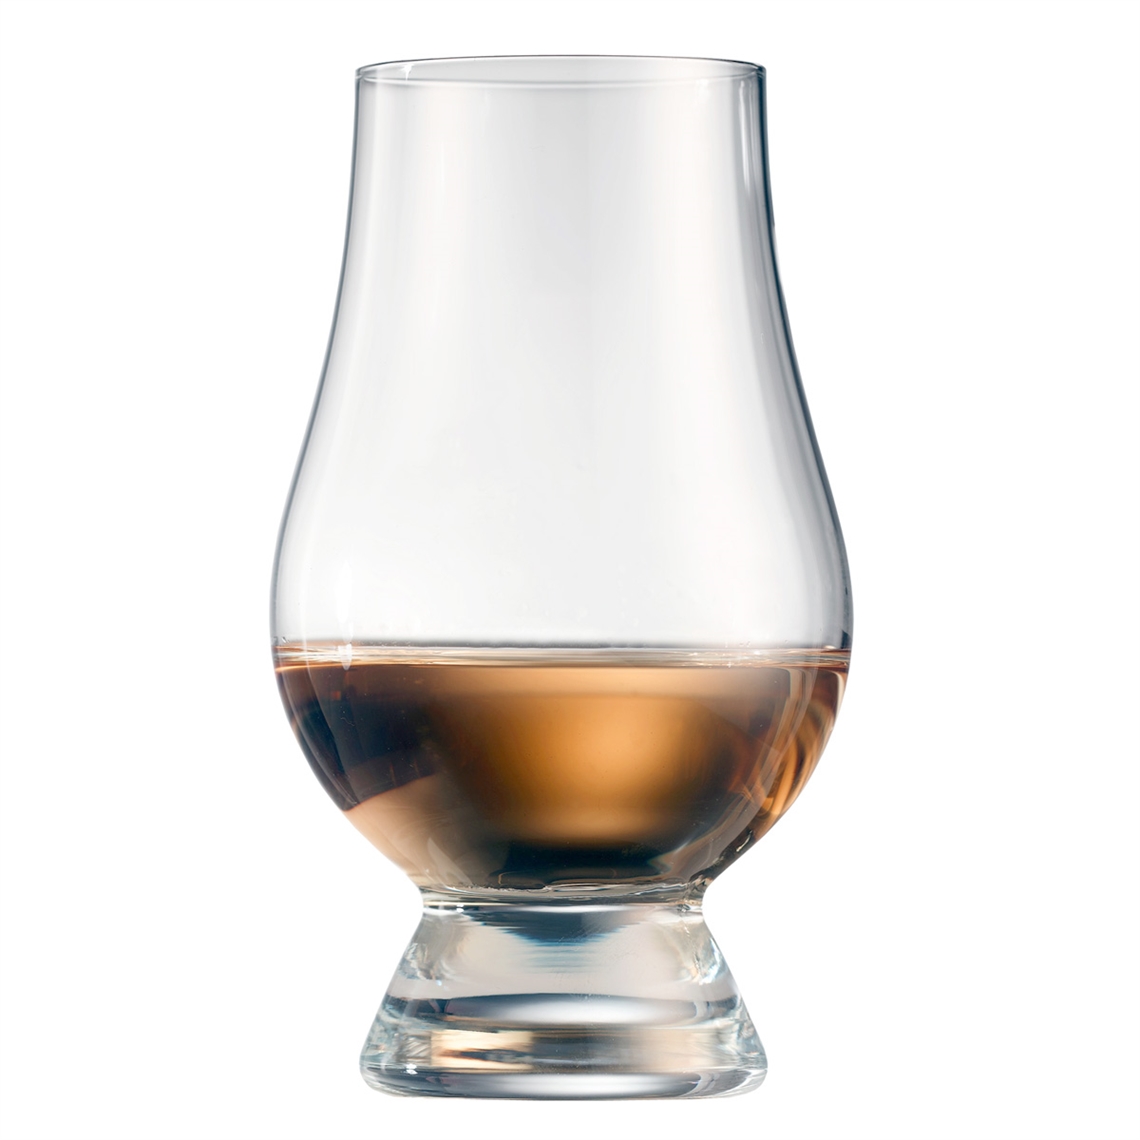 View more water glasses / tumblers from our Whisky Glasses range